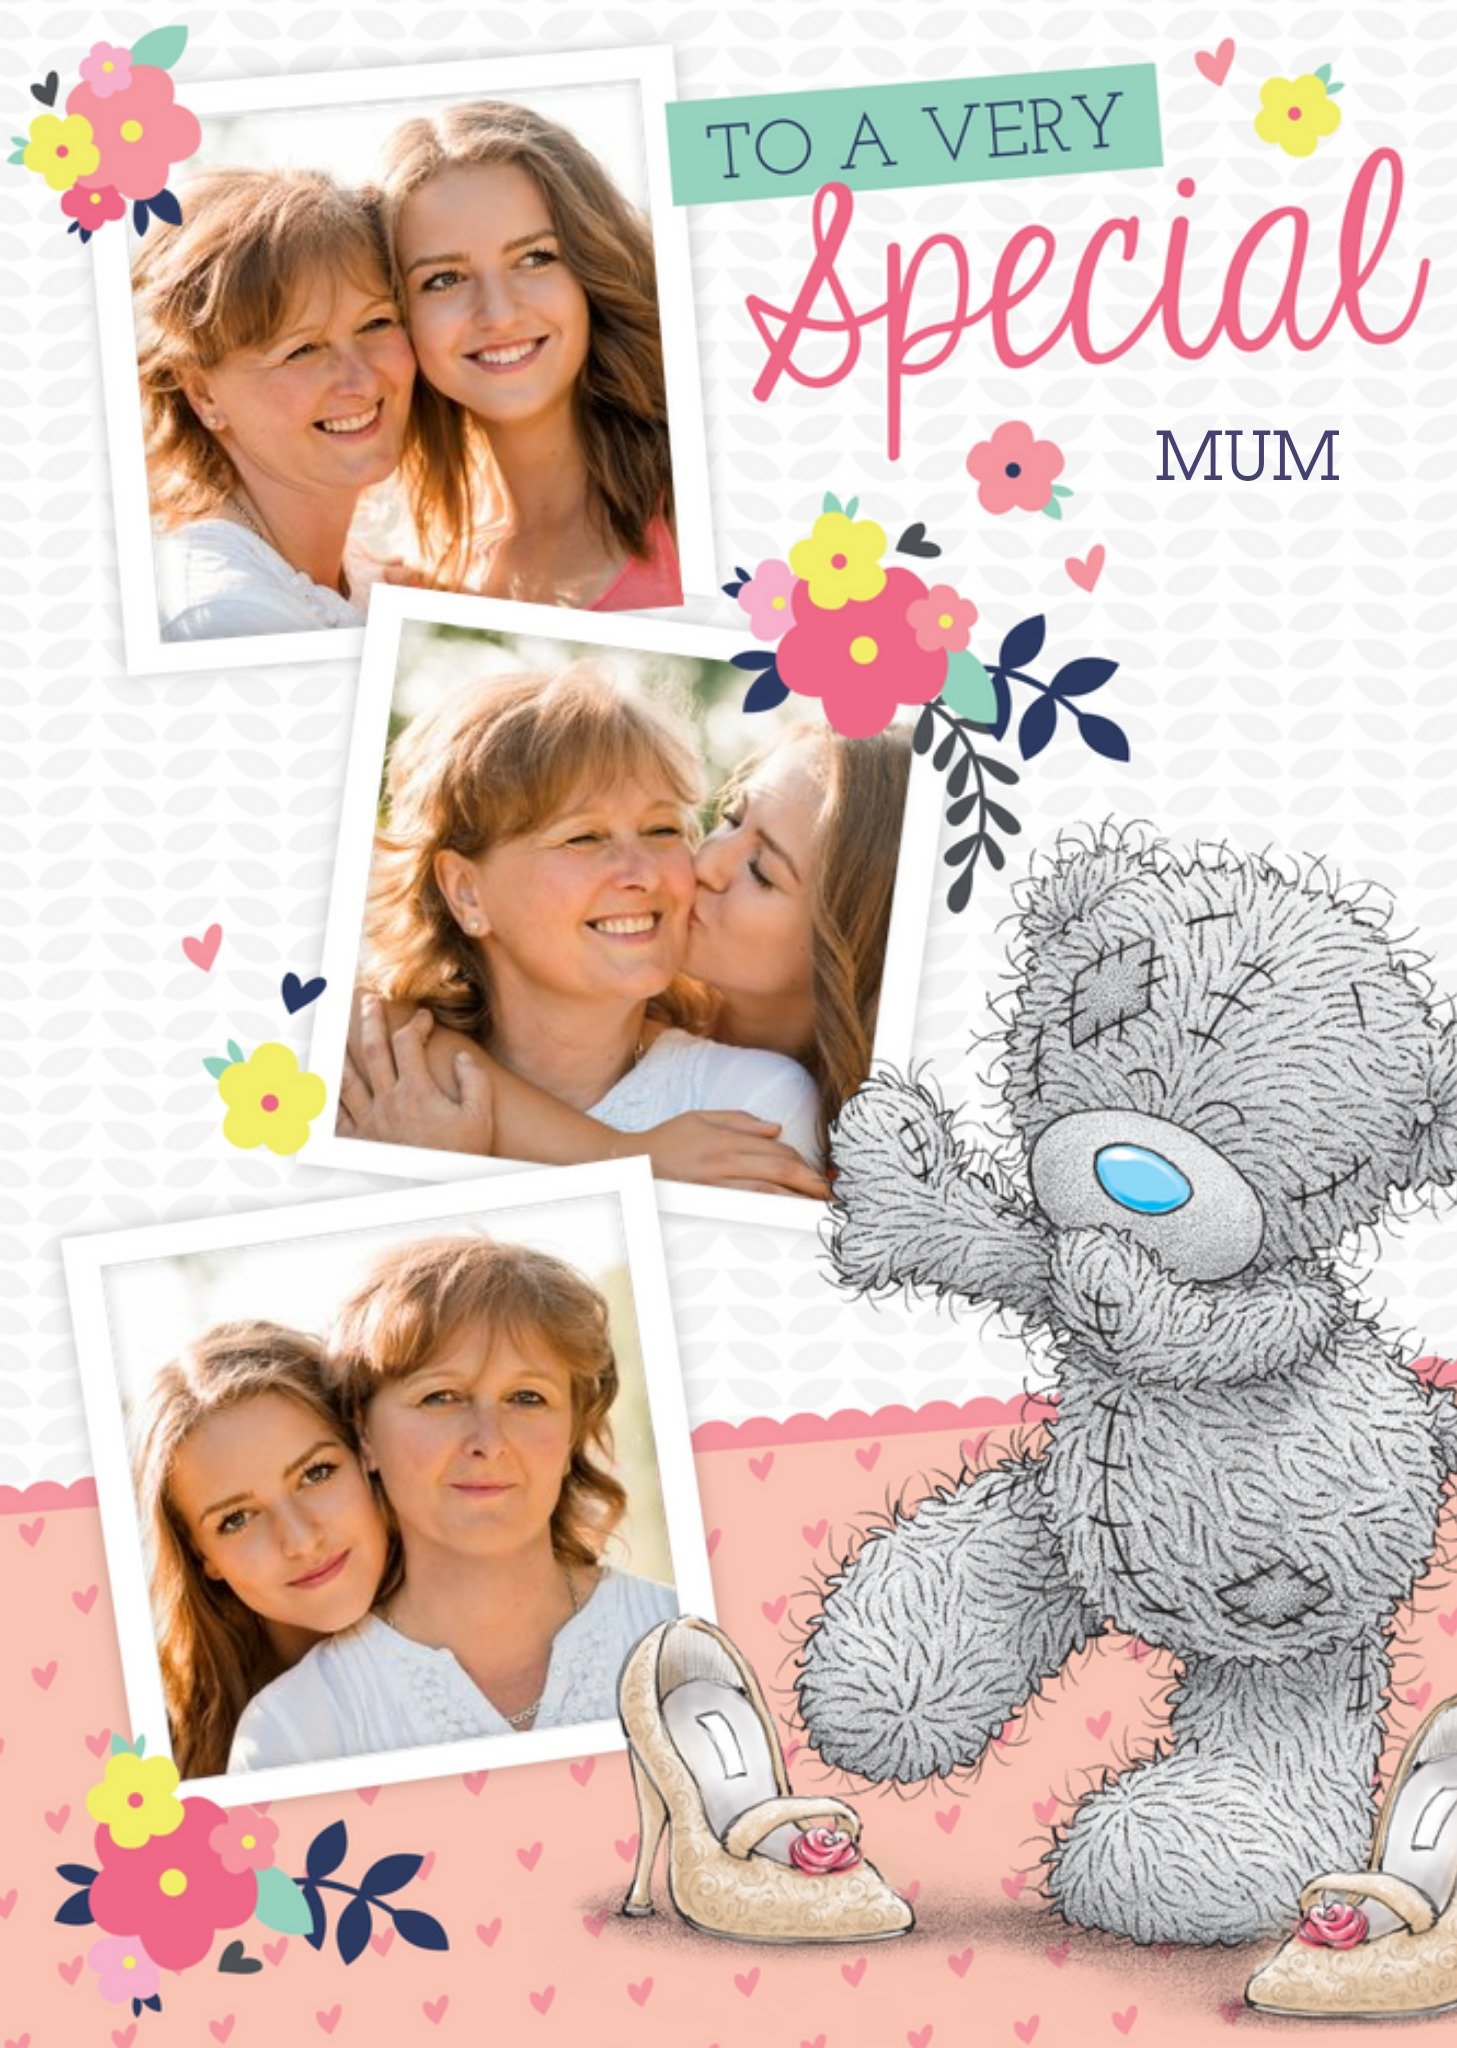 Me To You Mother's Day Card - Tatty Teddy Photo Upload Card - To A Very Special Mum Ecard